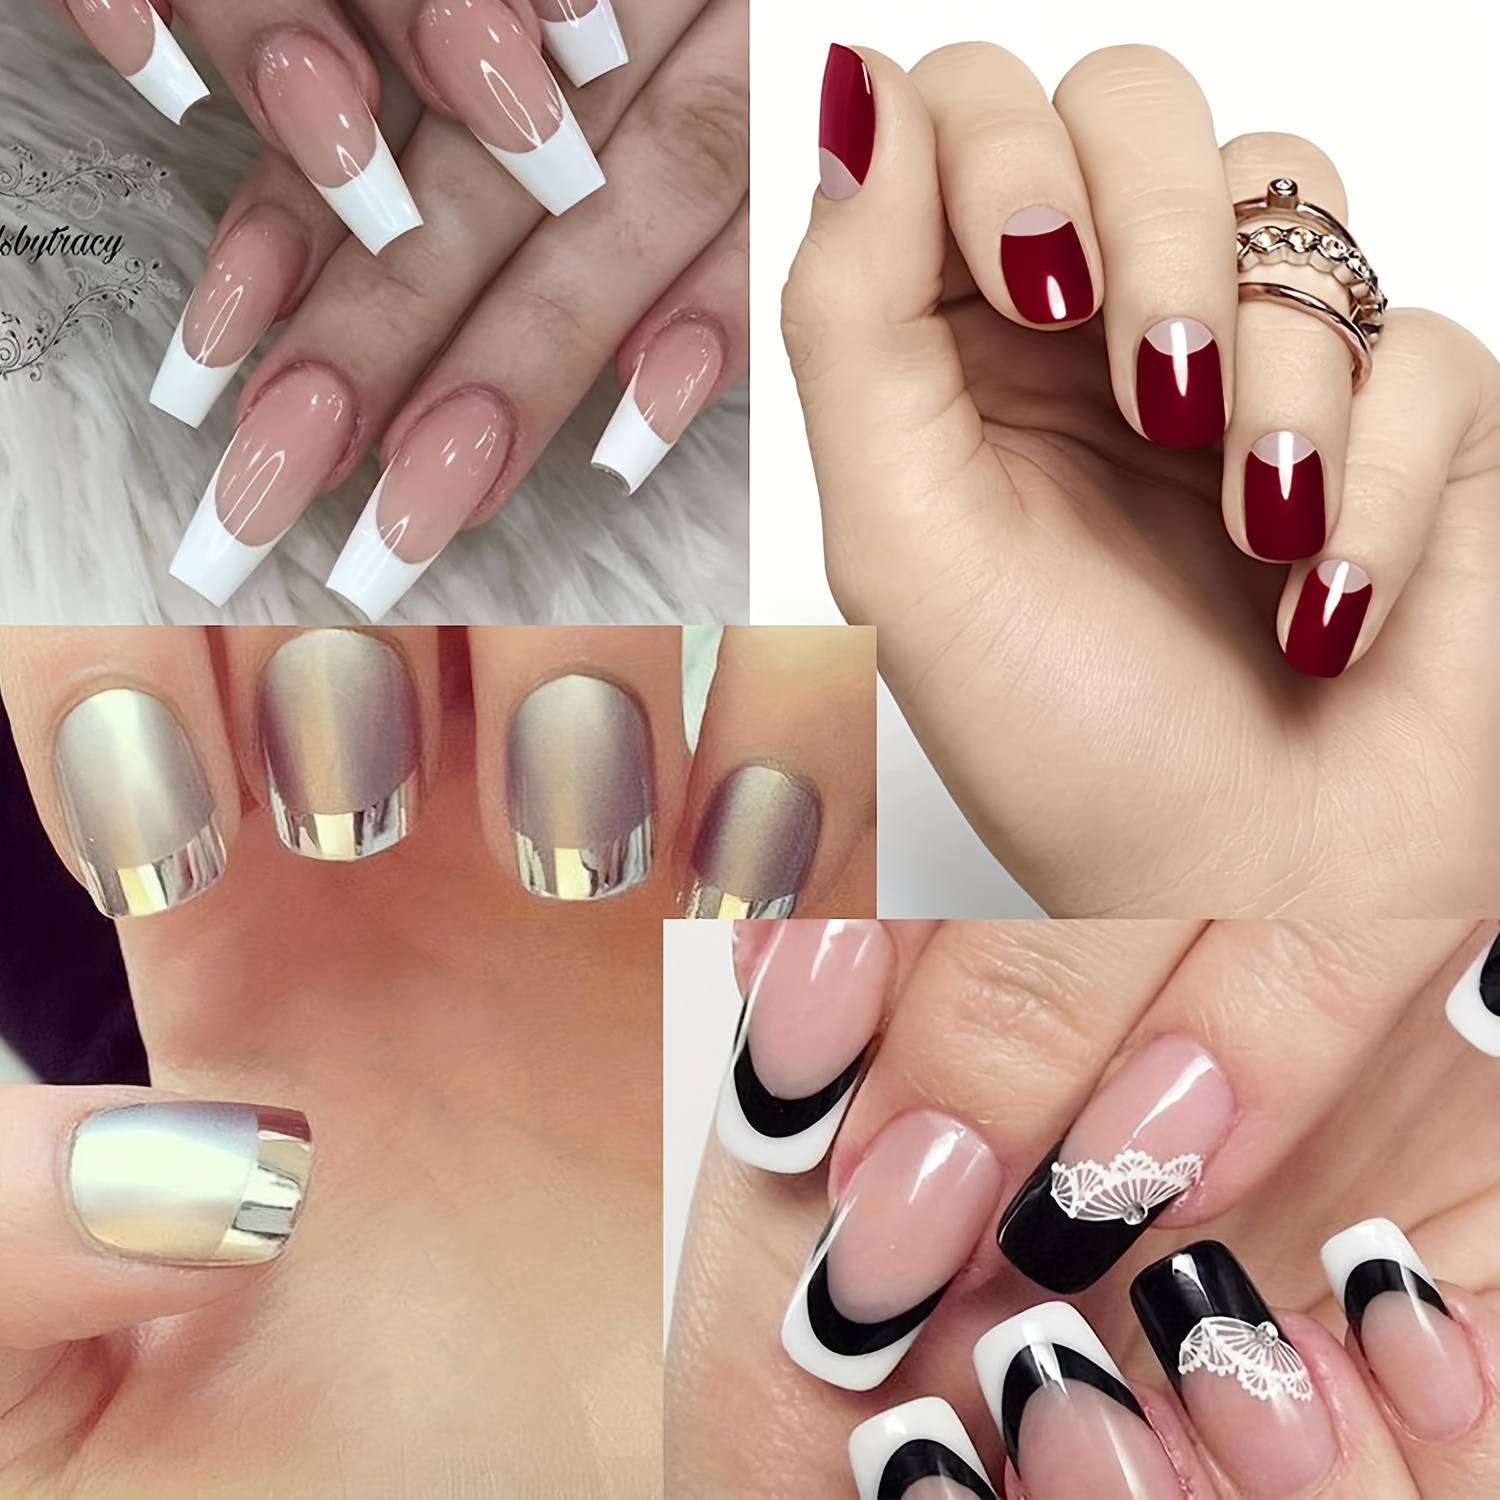 3 Easy Nail Art Ideas Without Any Tools!